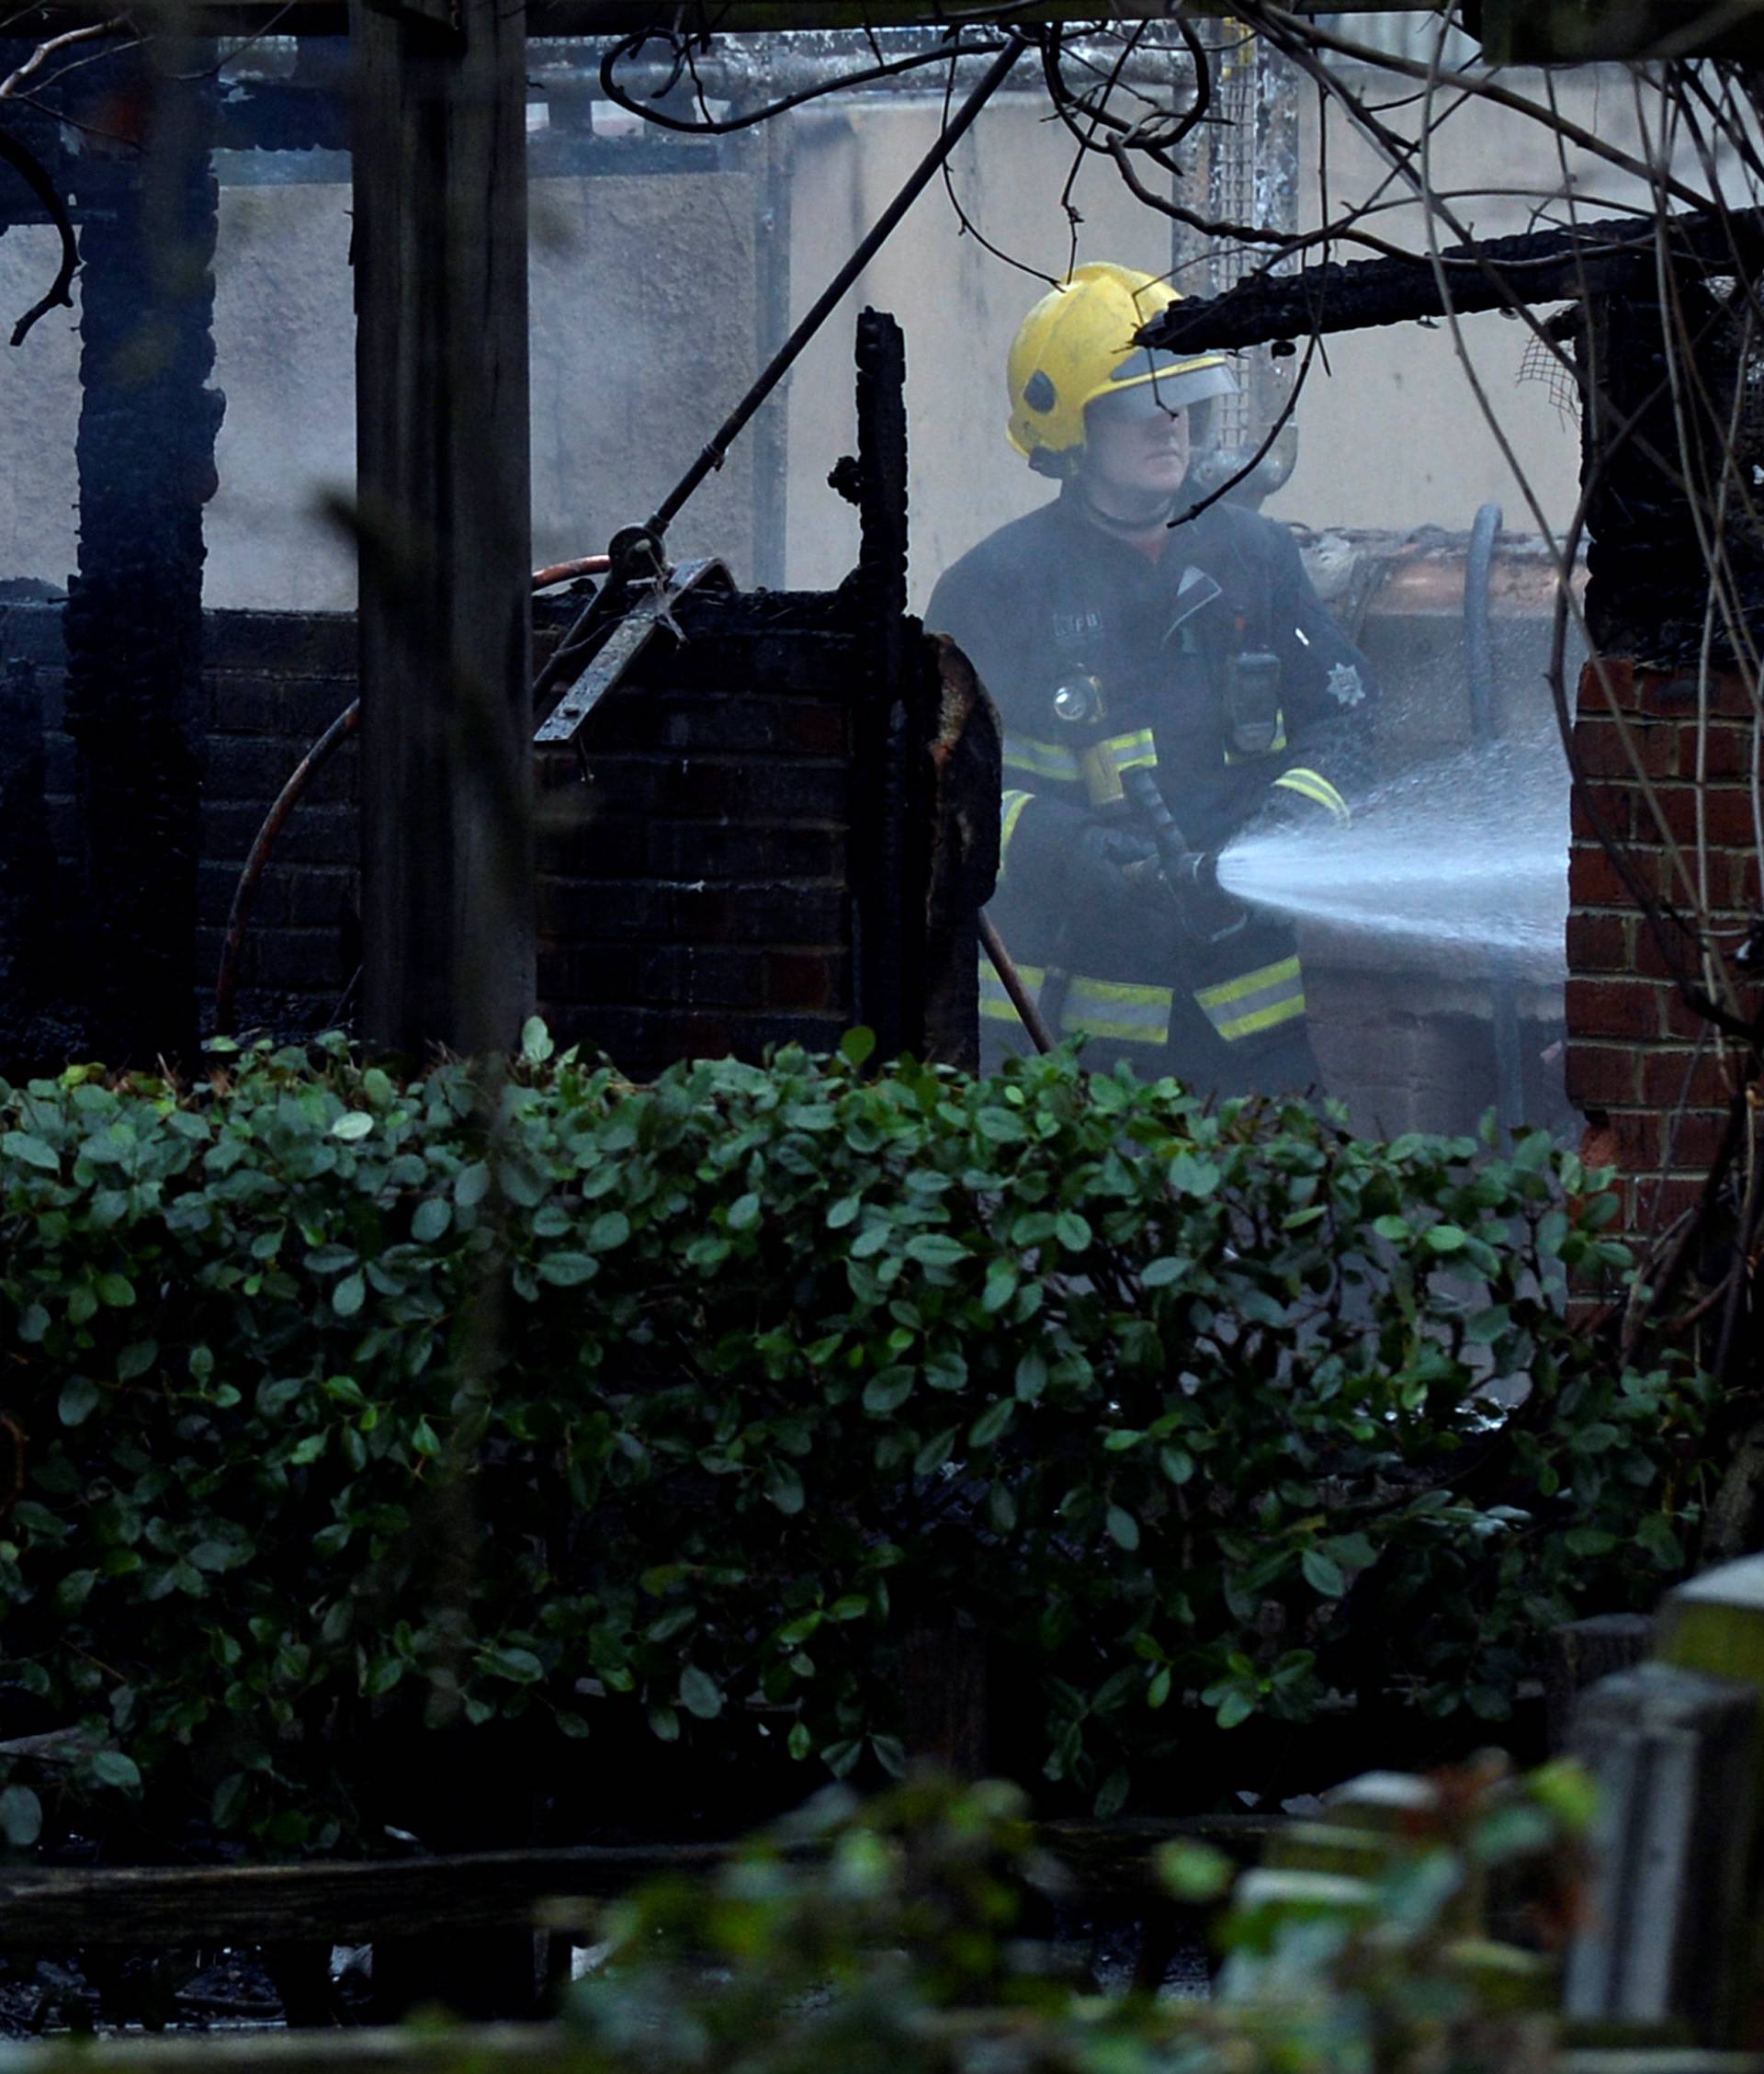 Firefighters attend a blaze at London Zoo following a fire which broke out at a shop and cafe at the attraction, in central London